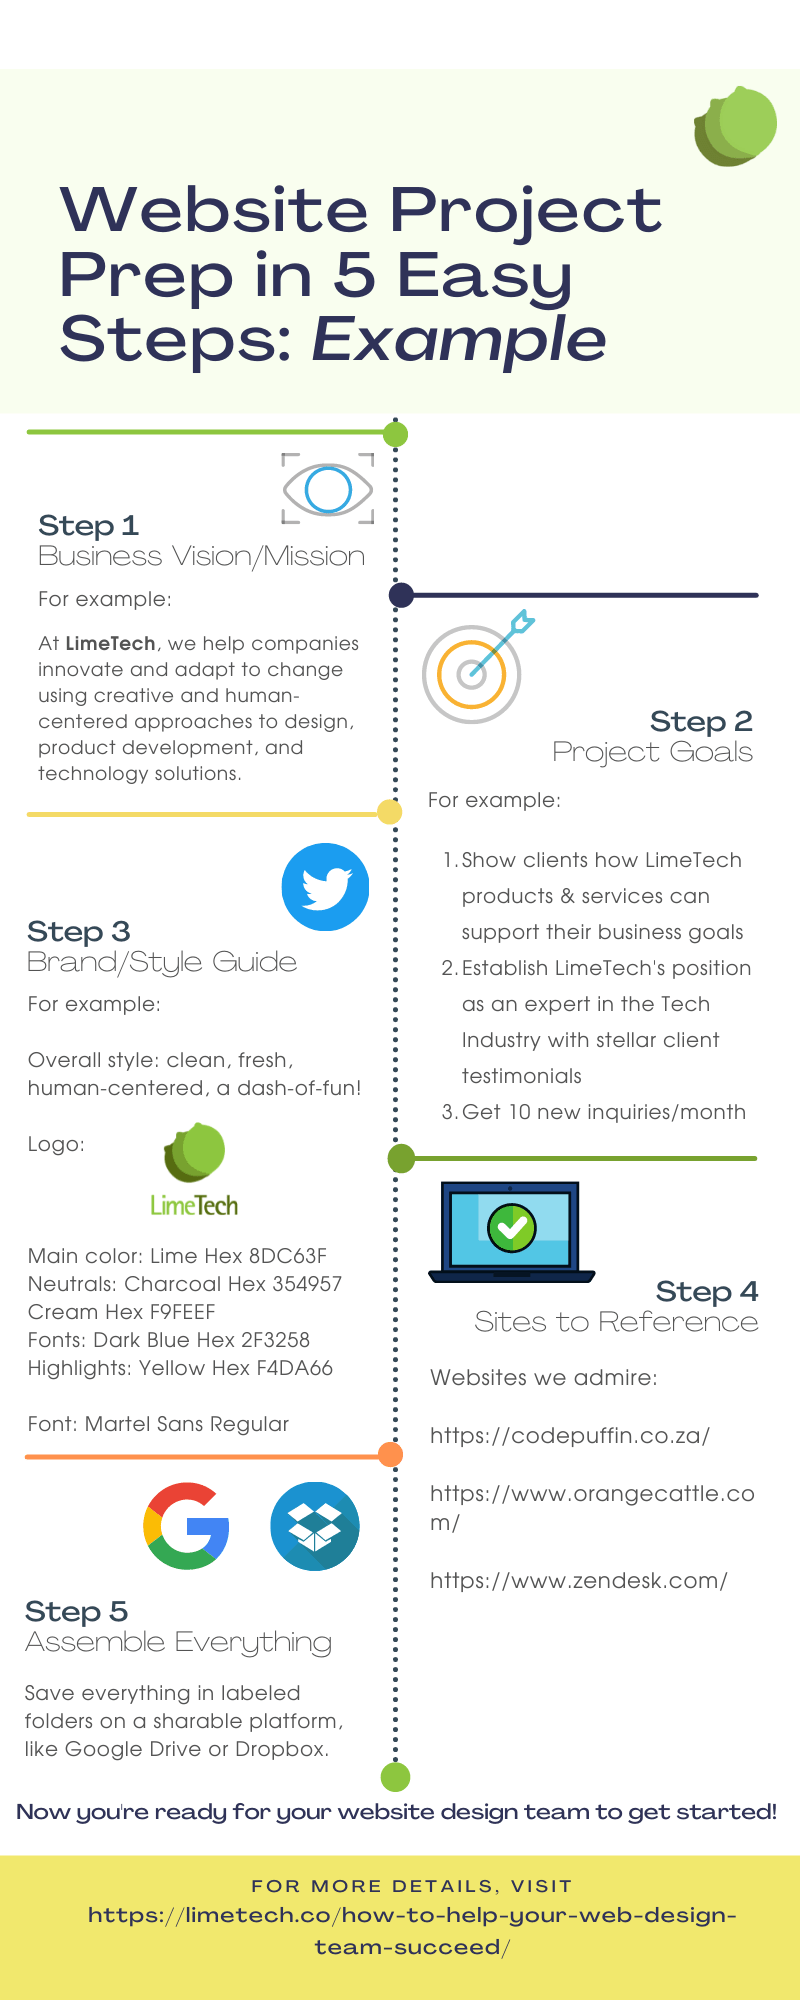 Infographic website project prep 5 steps example using LimeTech